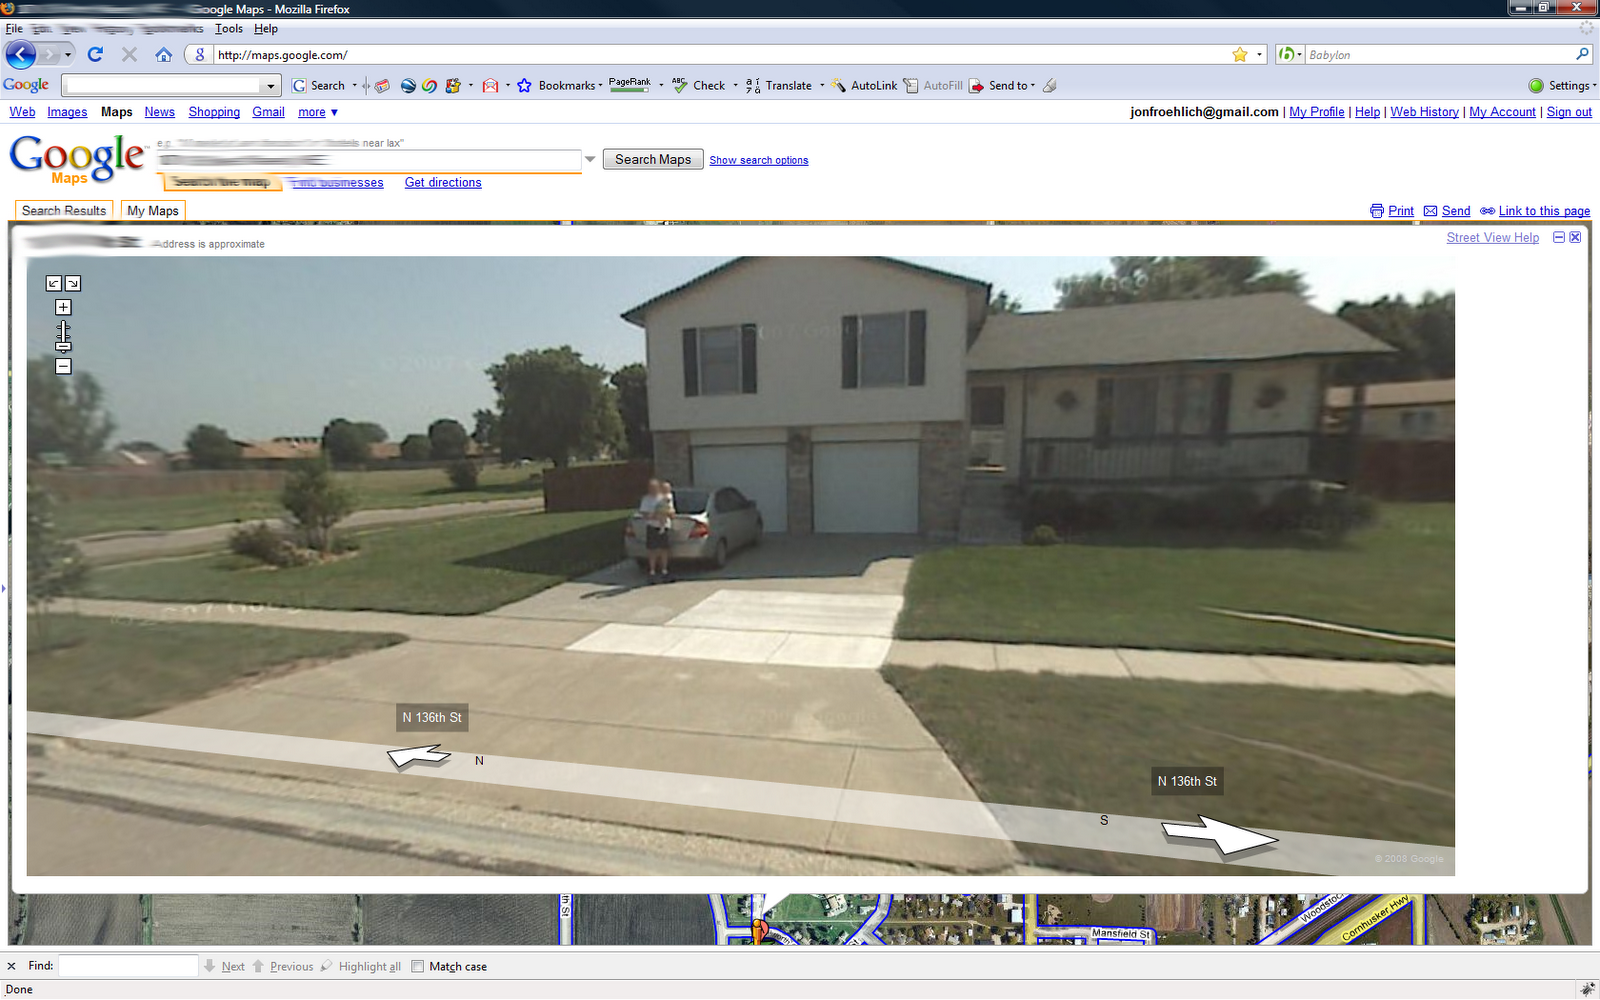 [Erin+and+Steve+on+Streetview2+-+obscured.png]